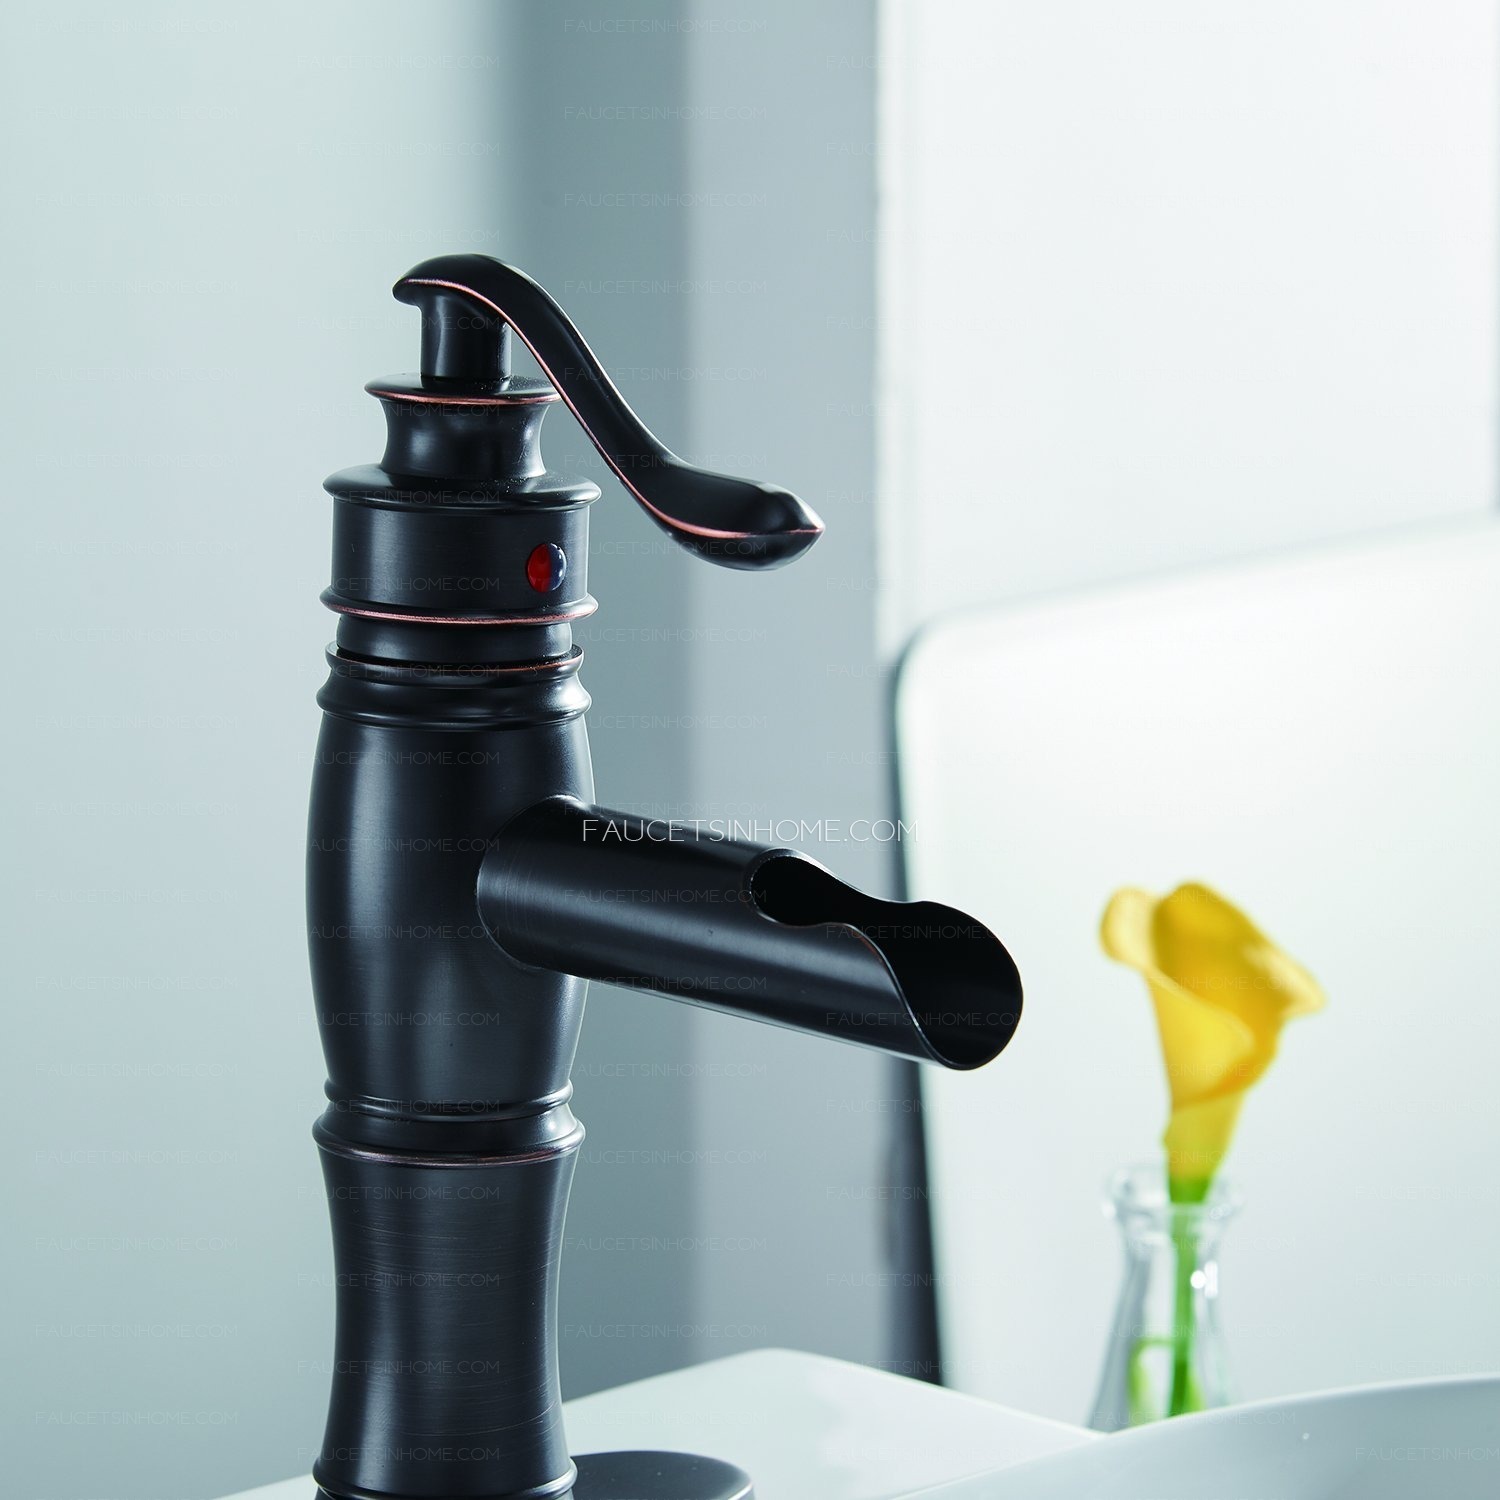 Oil Rubbed Bronze Single Lever Waterfall Bathroom Faucet Mixer Tap